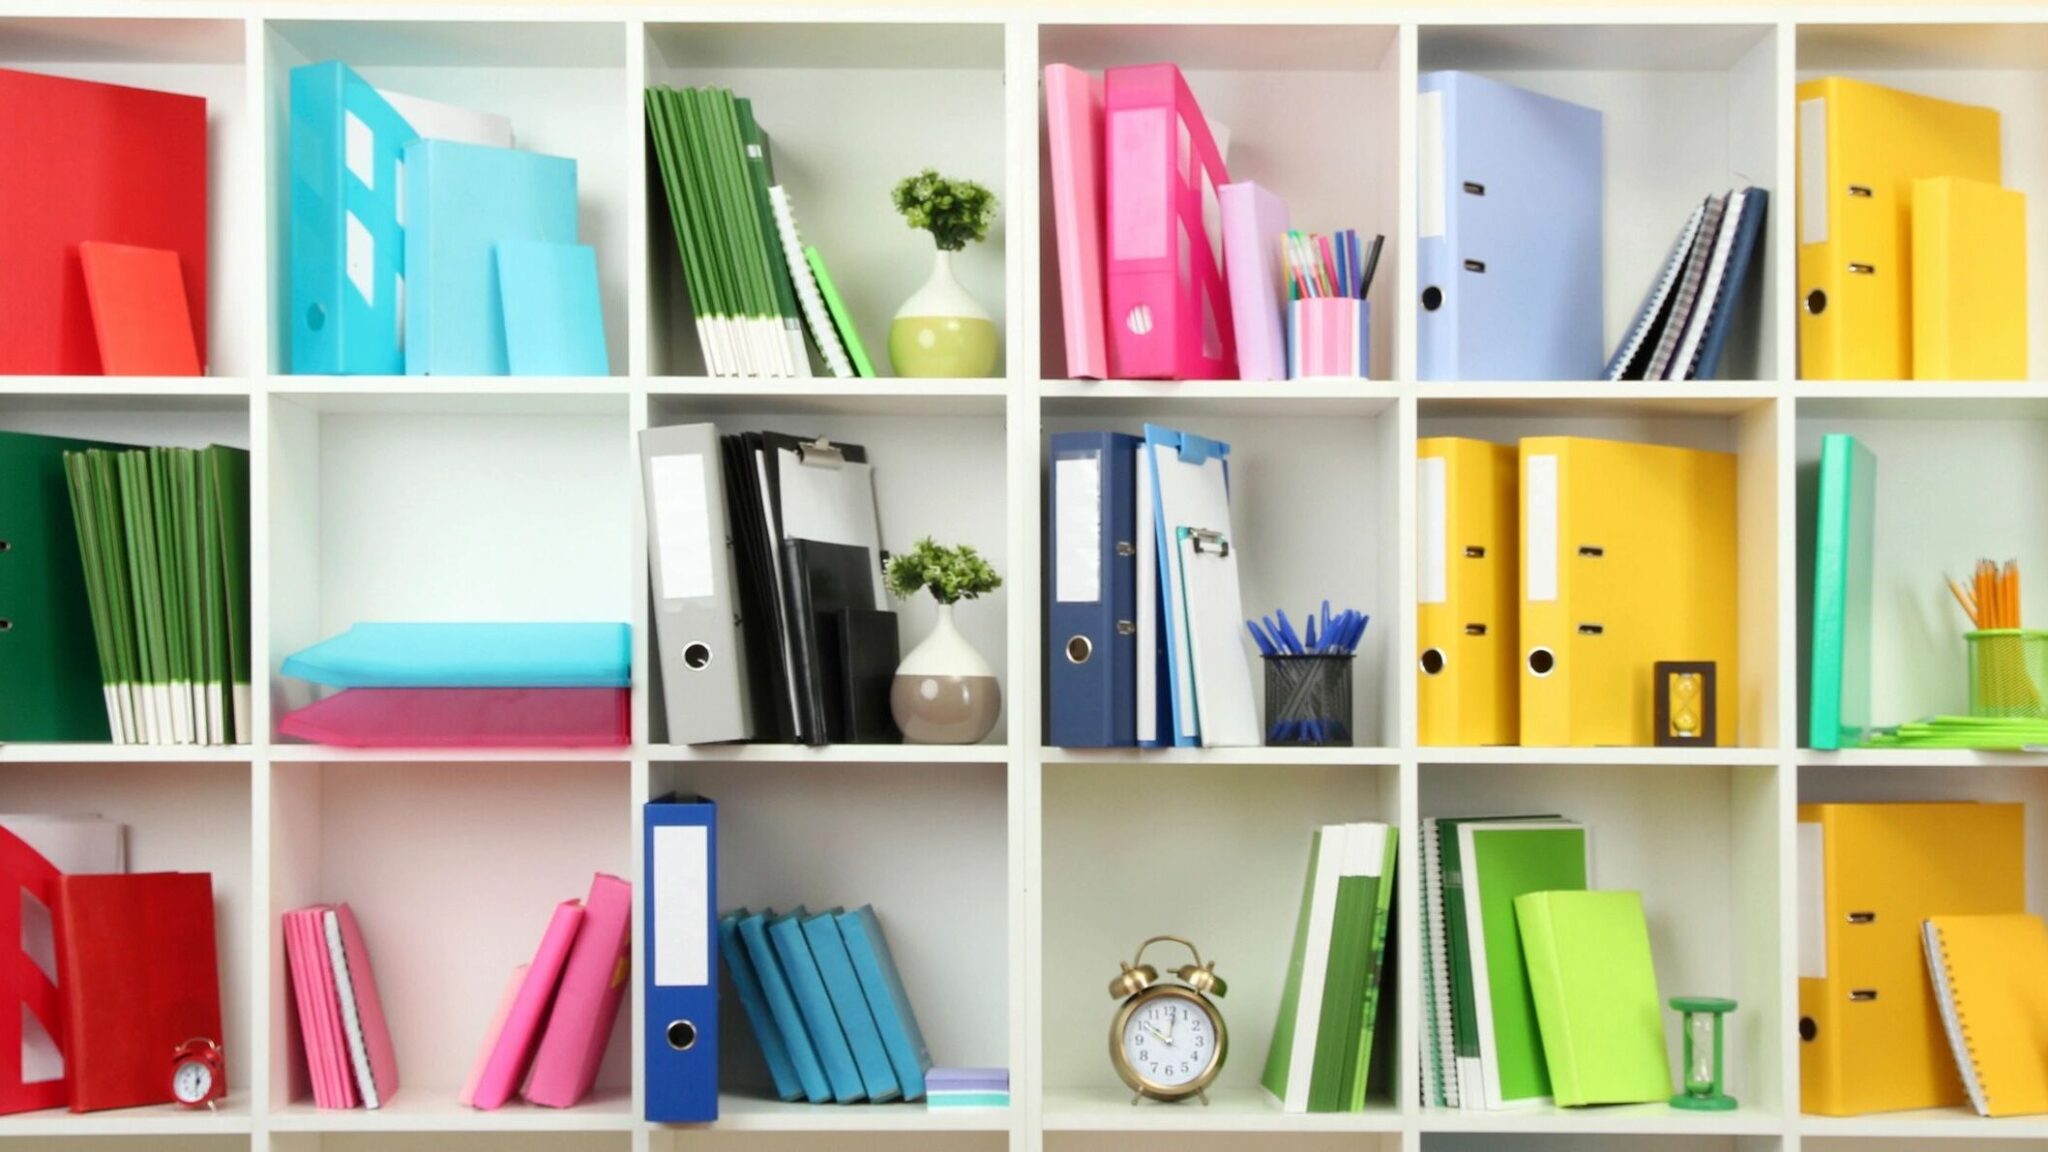 How to Stay Organized in Real Estate | Blog | InvestingTE.com